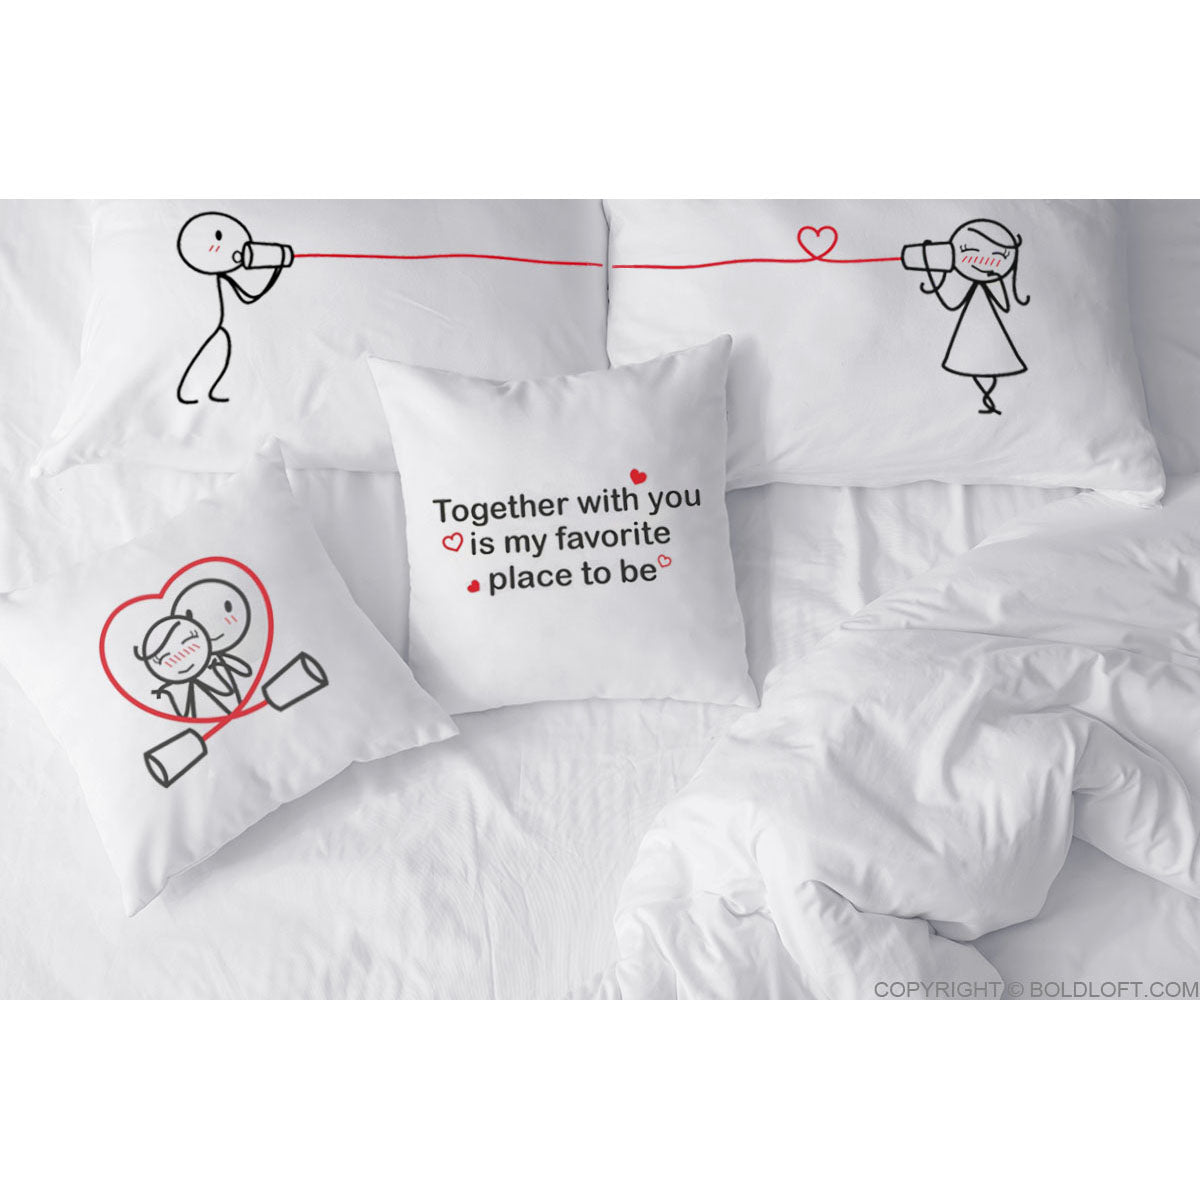 boldloft couple gift set couple pillowcases his and hers pillow covers